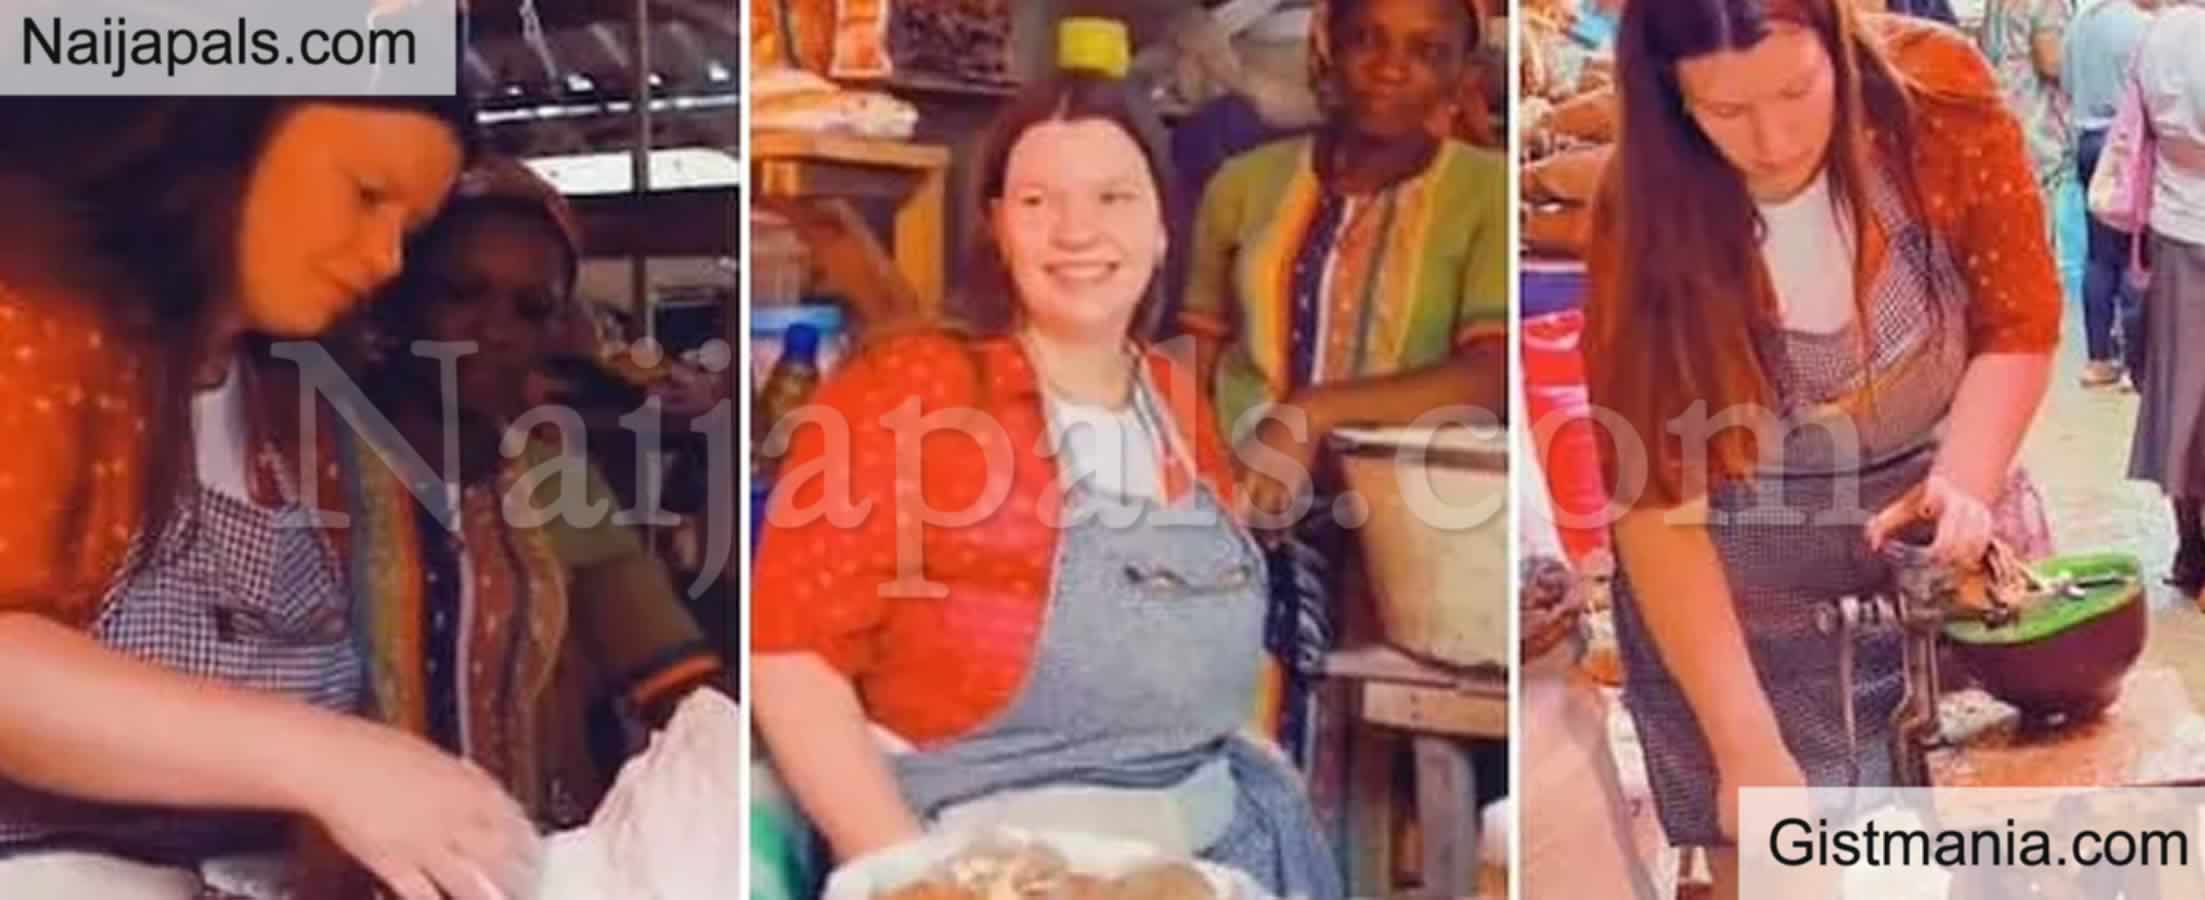 <img alt='.' class='lazyload' data-src='https://img.gistmania.com/emot/video.gif' /> <b>Oyinbo Woman Spotted Grinding And Selling Foodstuff In Abuja Market</b> (VIDEO)